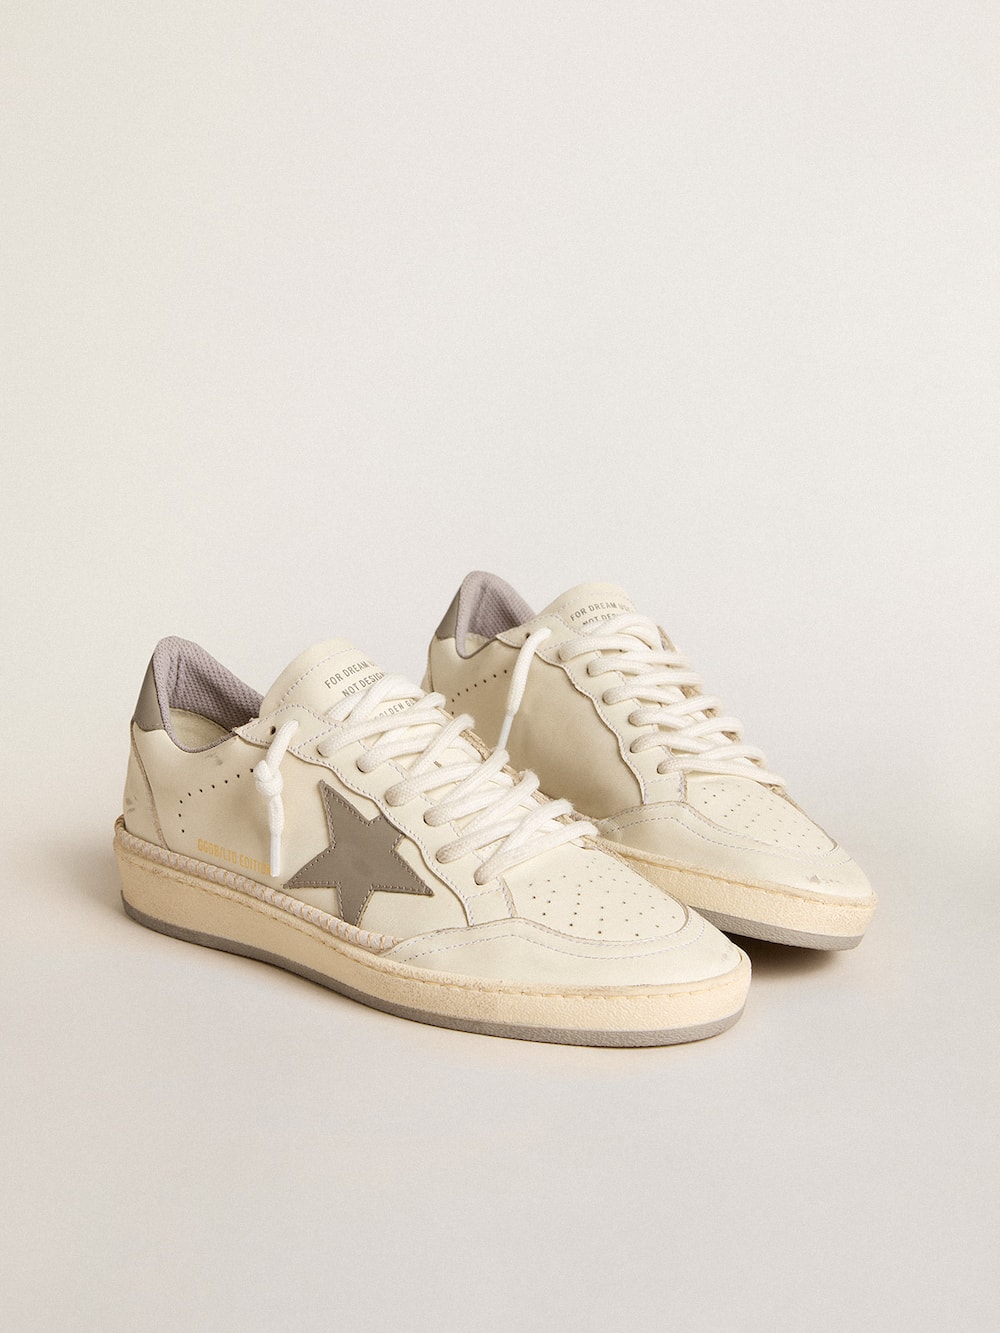 Golden Goose - Women’s Ball Star LTD with gray leather star and heel tab and stitching in 